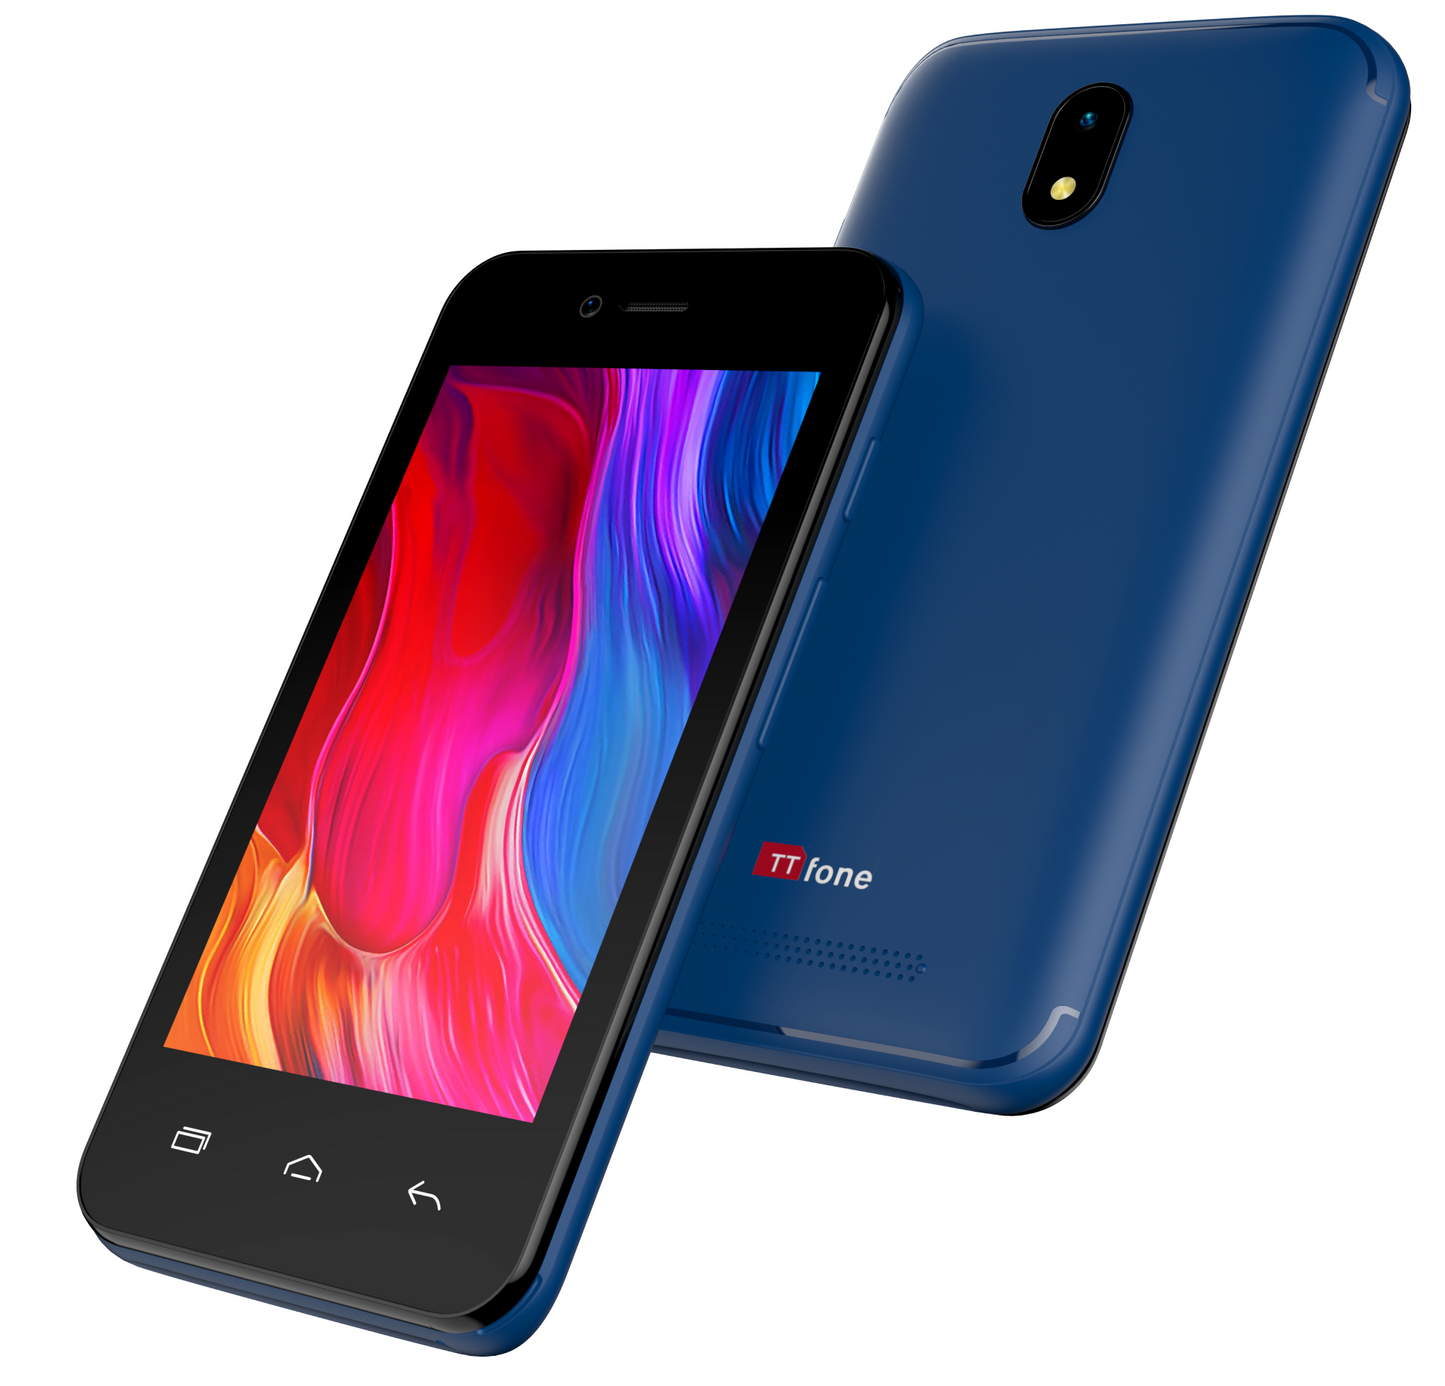 TTfone Blue TT20 Dual SIM with Mains Charger and Vodafone Pay As You Go Sim Card